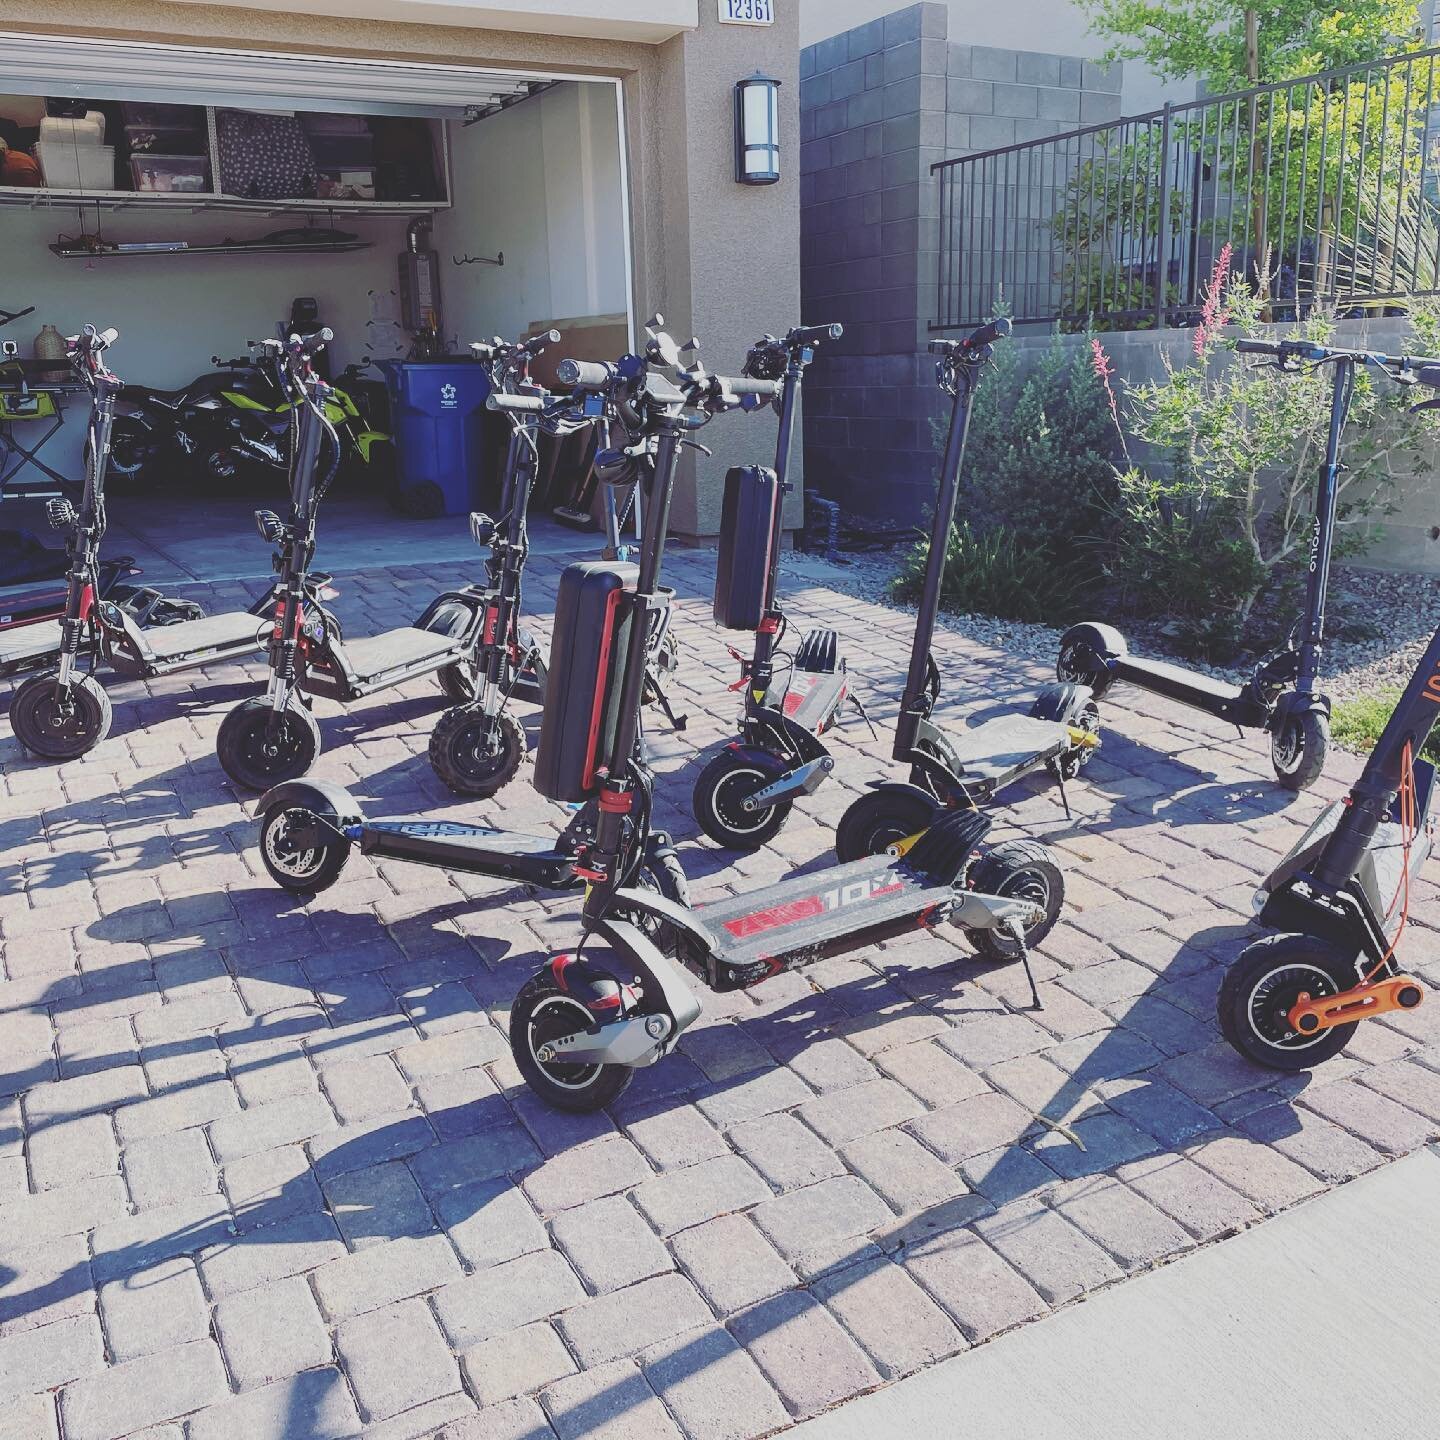 Dream garage. 😂 #scooters